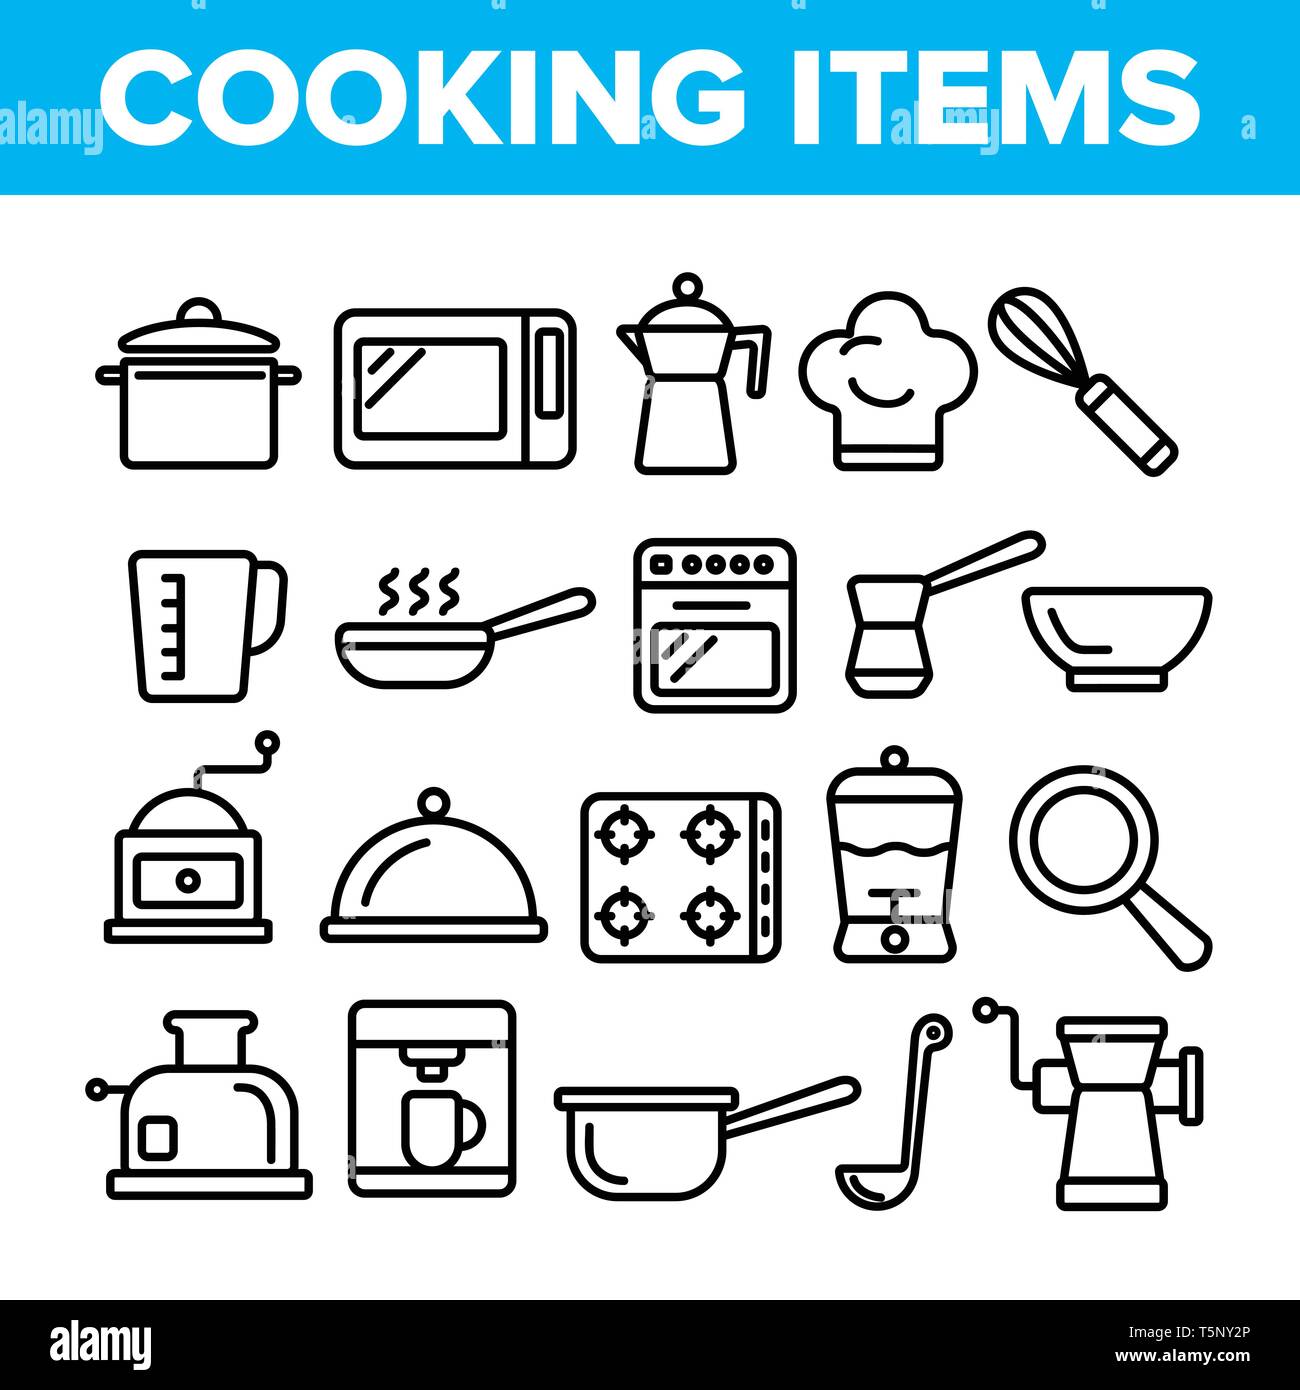 Cooking Items Vector Thin Line Icons Set Stock Vector